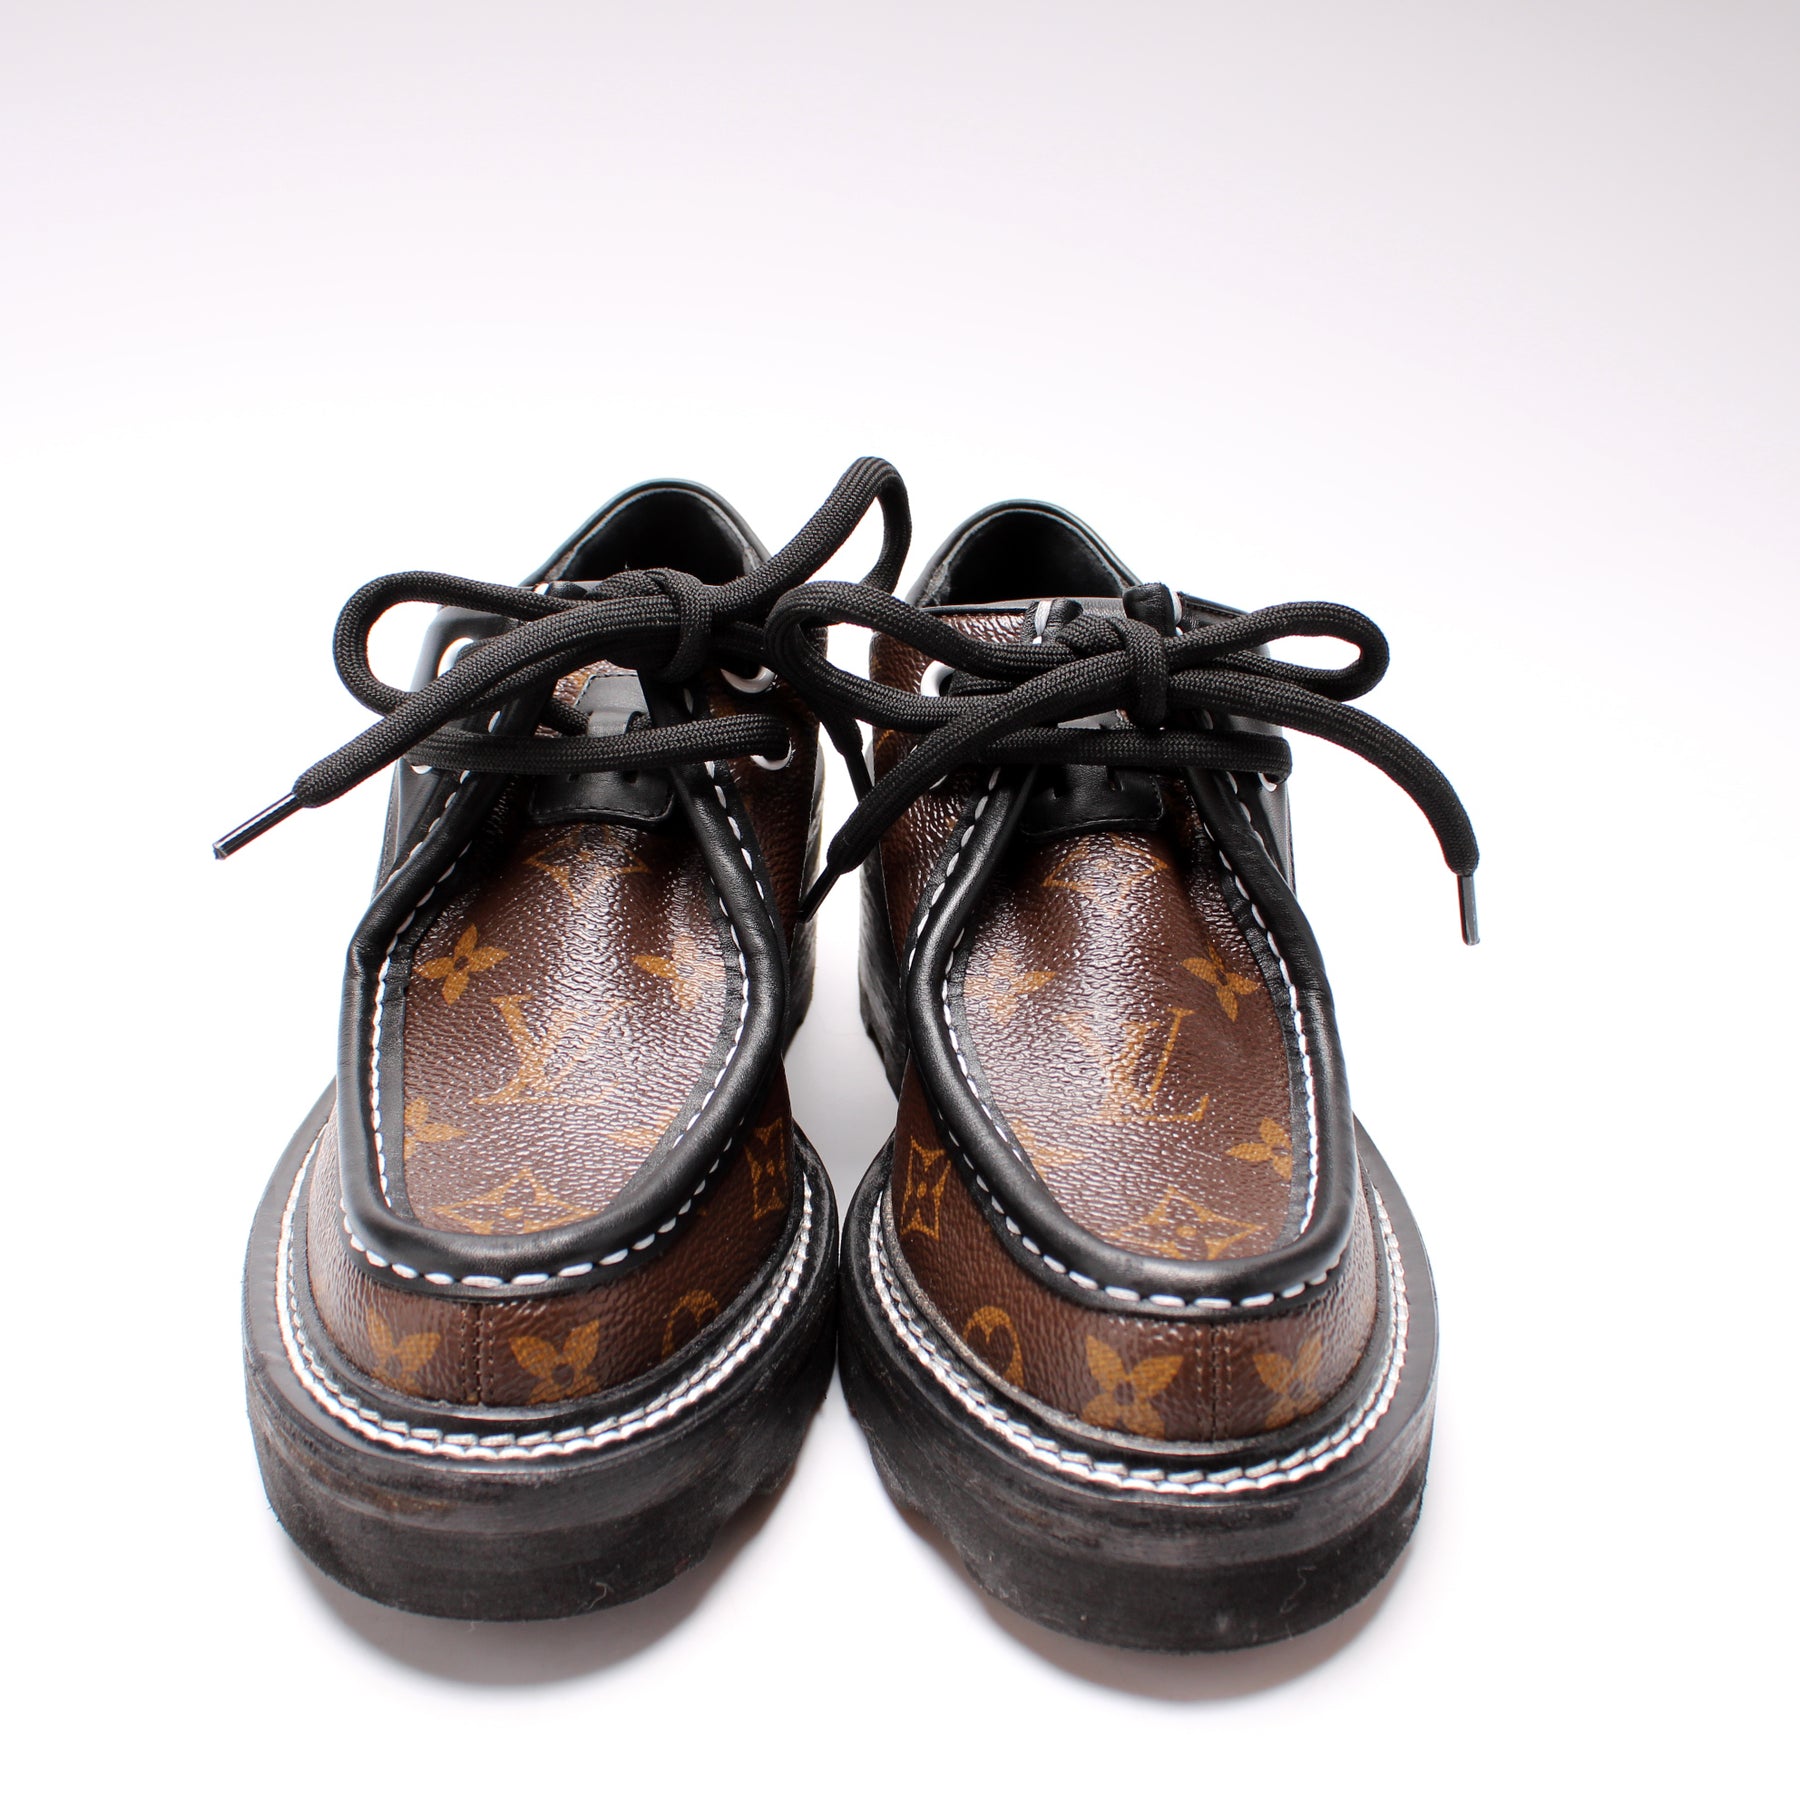 Louis Vuitton - Authenticated LV Beaubourg Lace Ups - Leather Brown Zebra for Women, Never Worn, with Tag